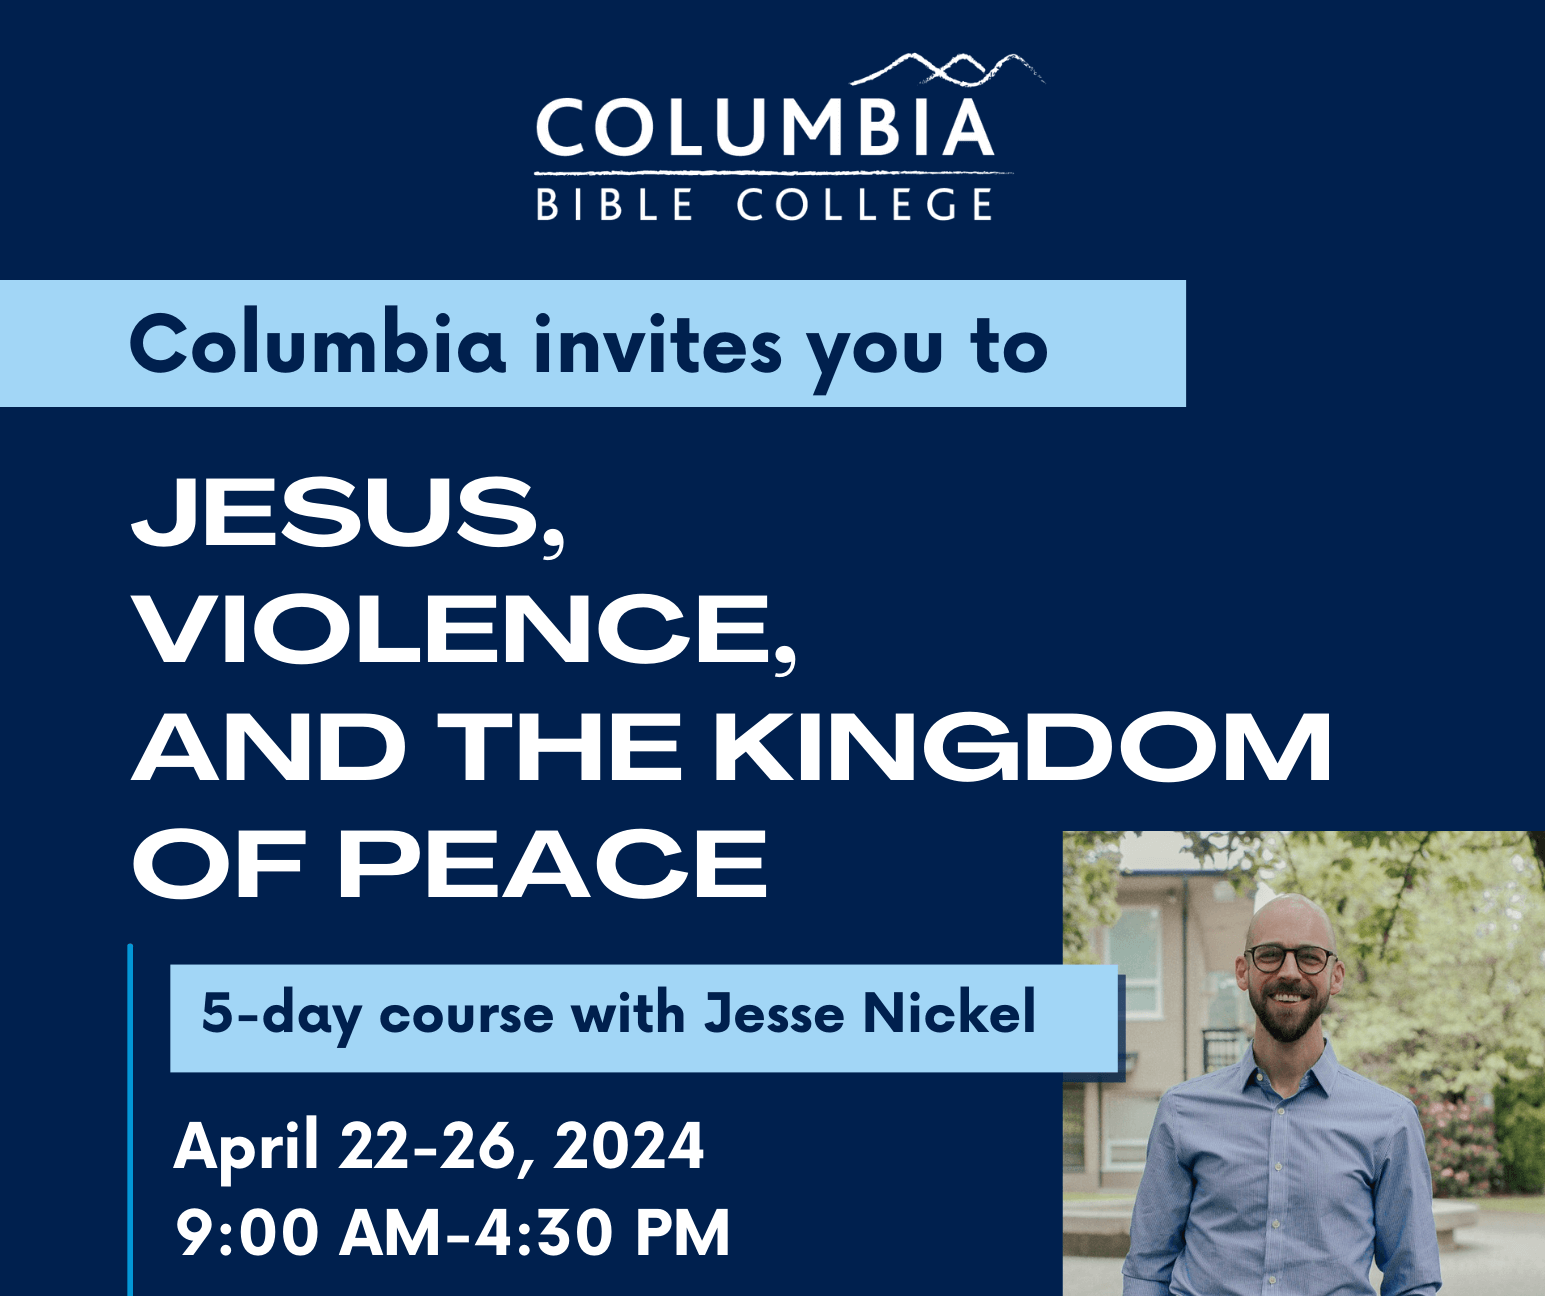 Columbia invites you to Jesus, Violence, and the Kingdom of Peace, a 5-day course with Jesse Nickel from April 22-26, 2024 from 9:00am to 4:30pm